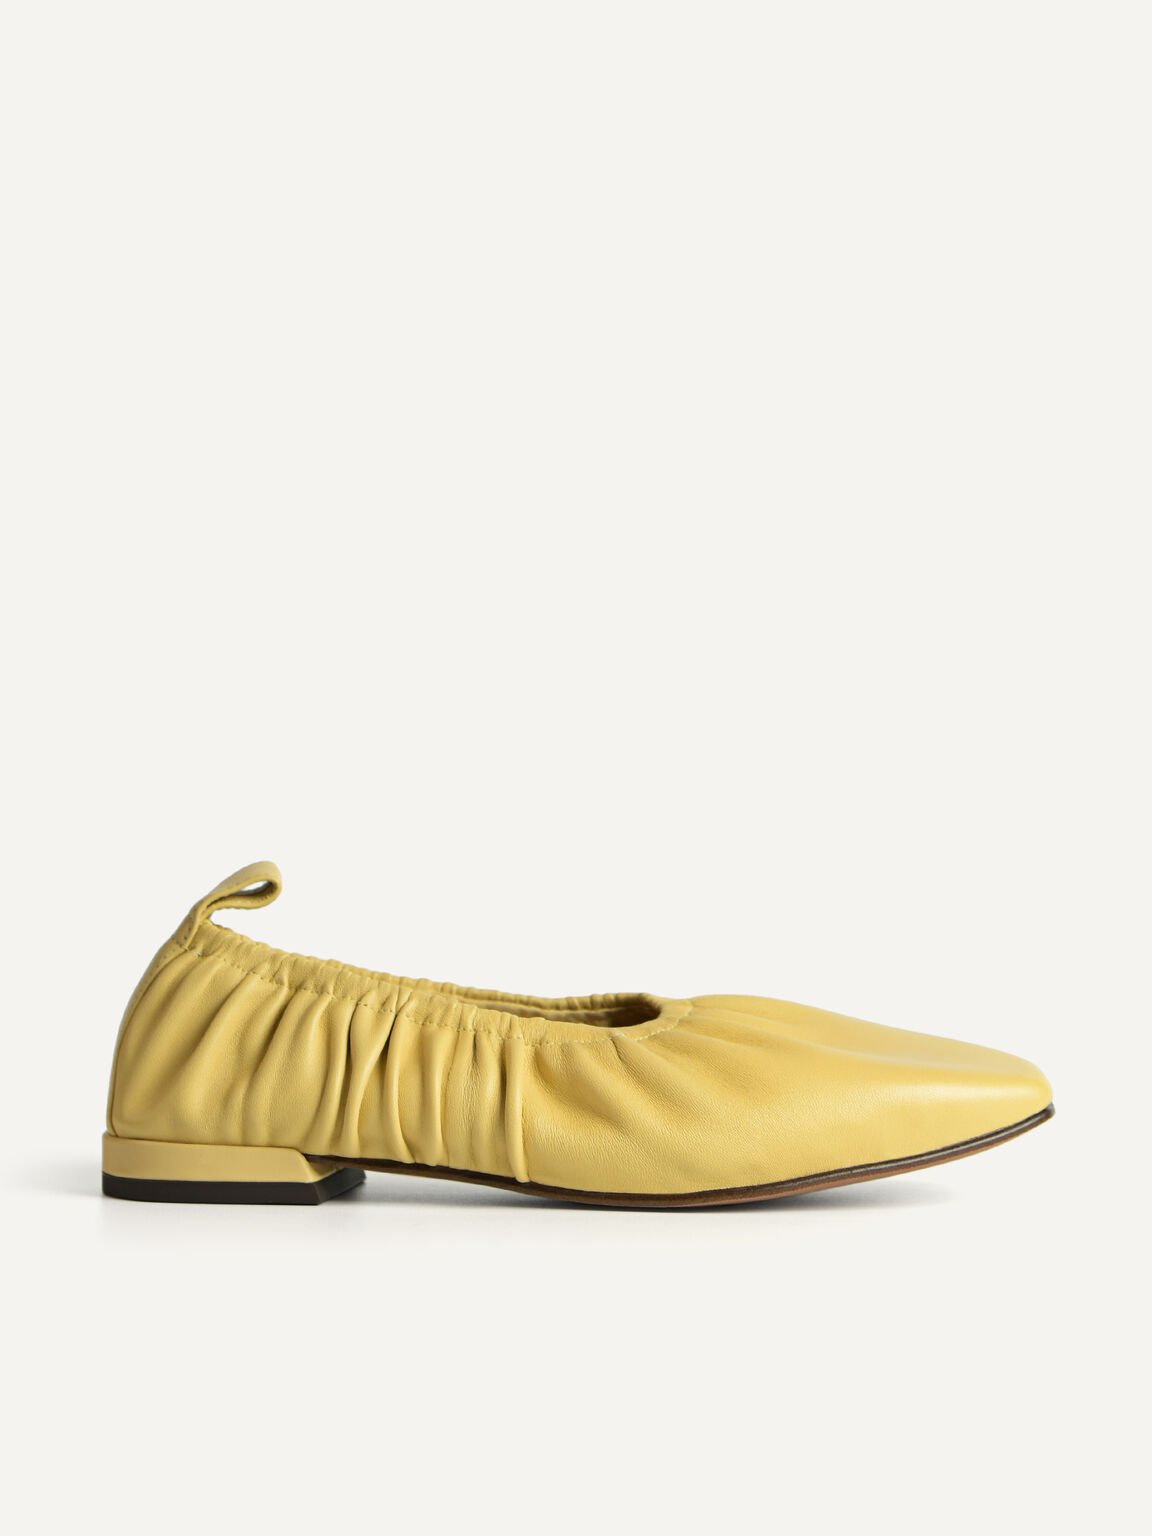 Ruched Leather Flats, Sand, hi-res